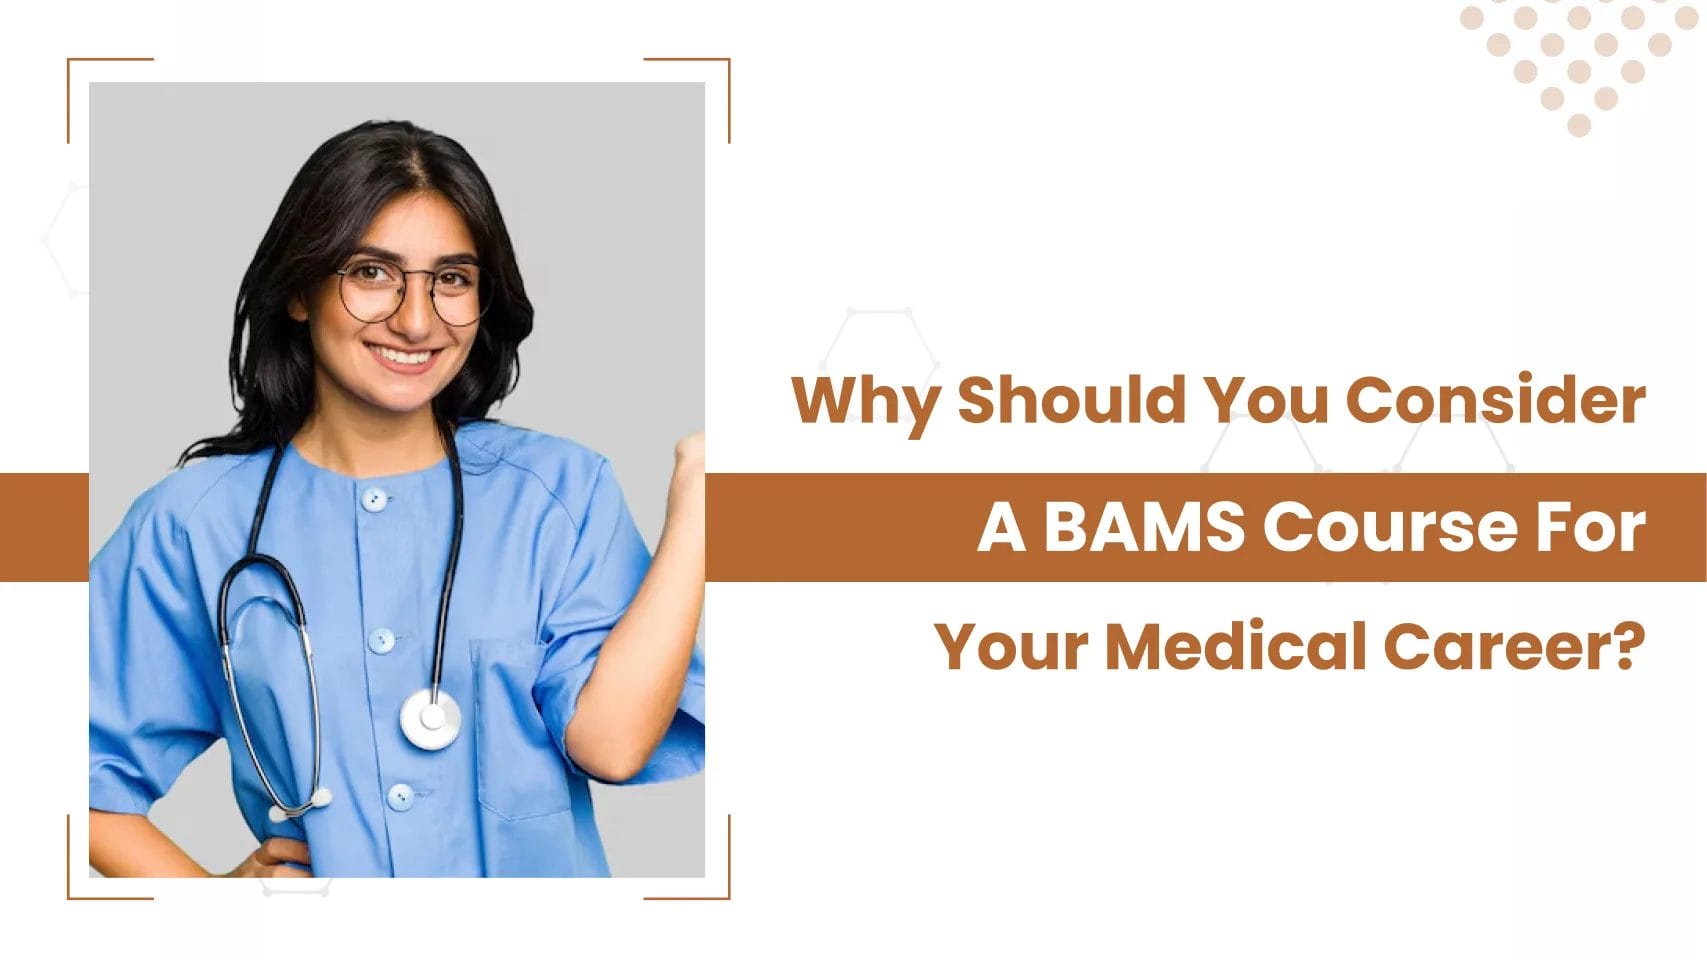 Why Should You Consider a BAMS Course For Your Medical Career?